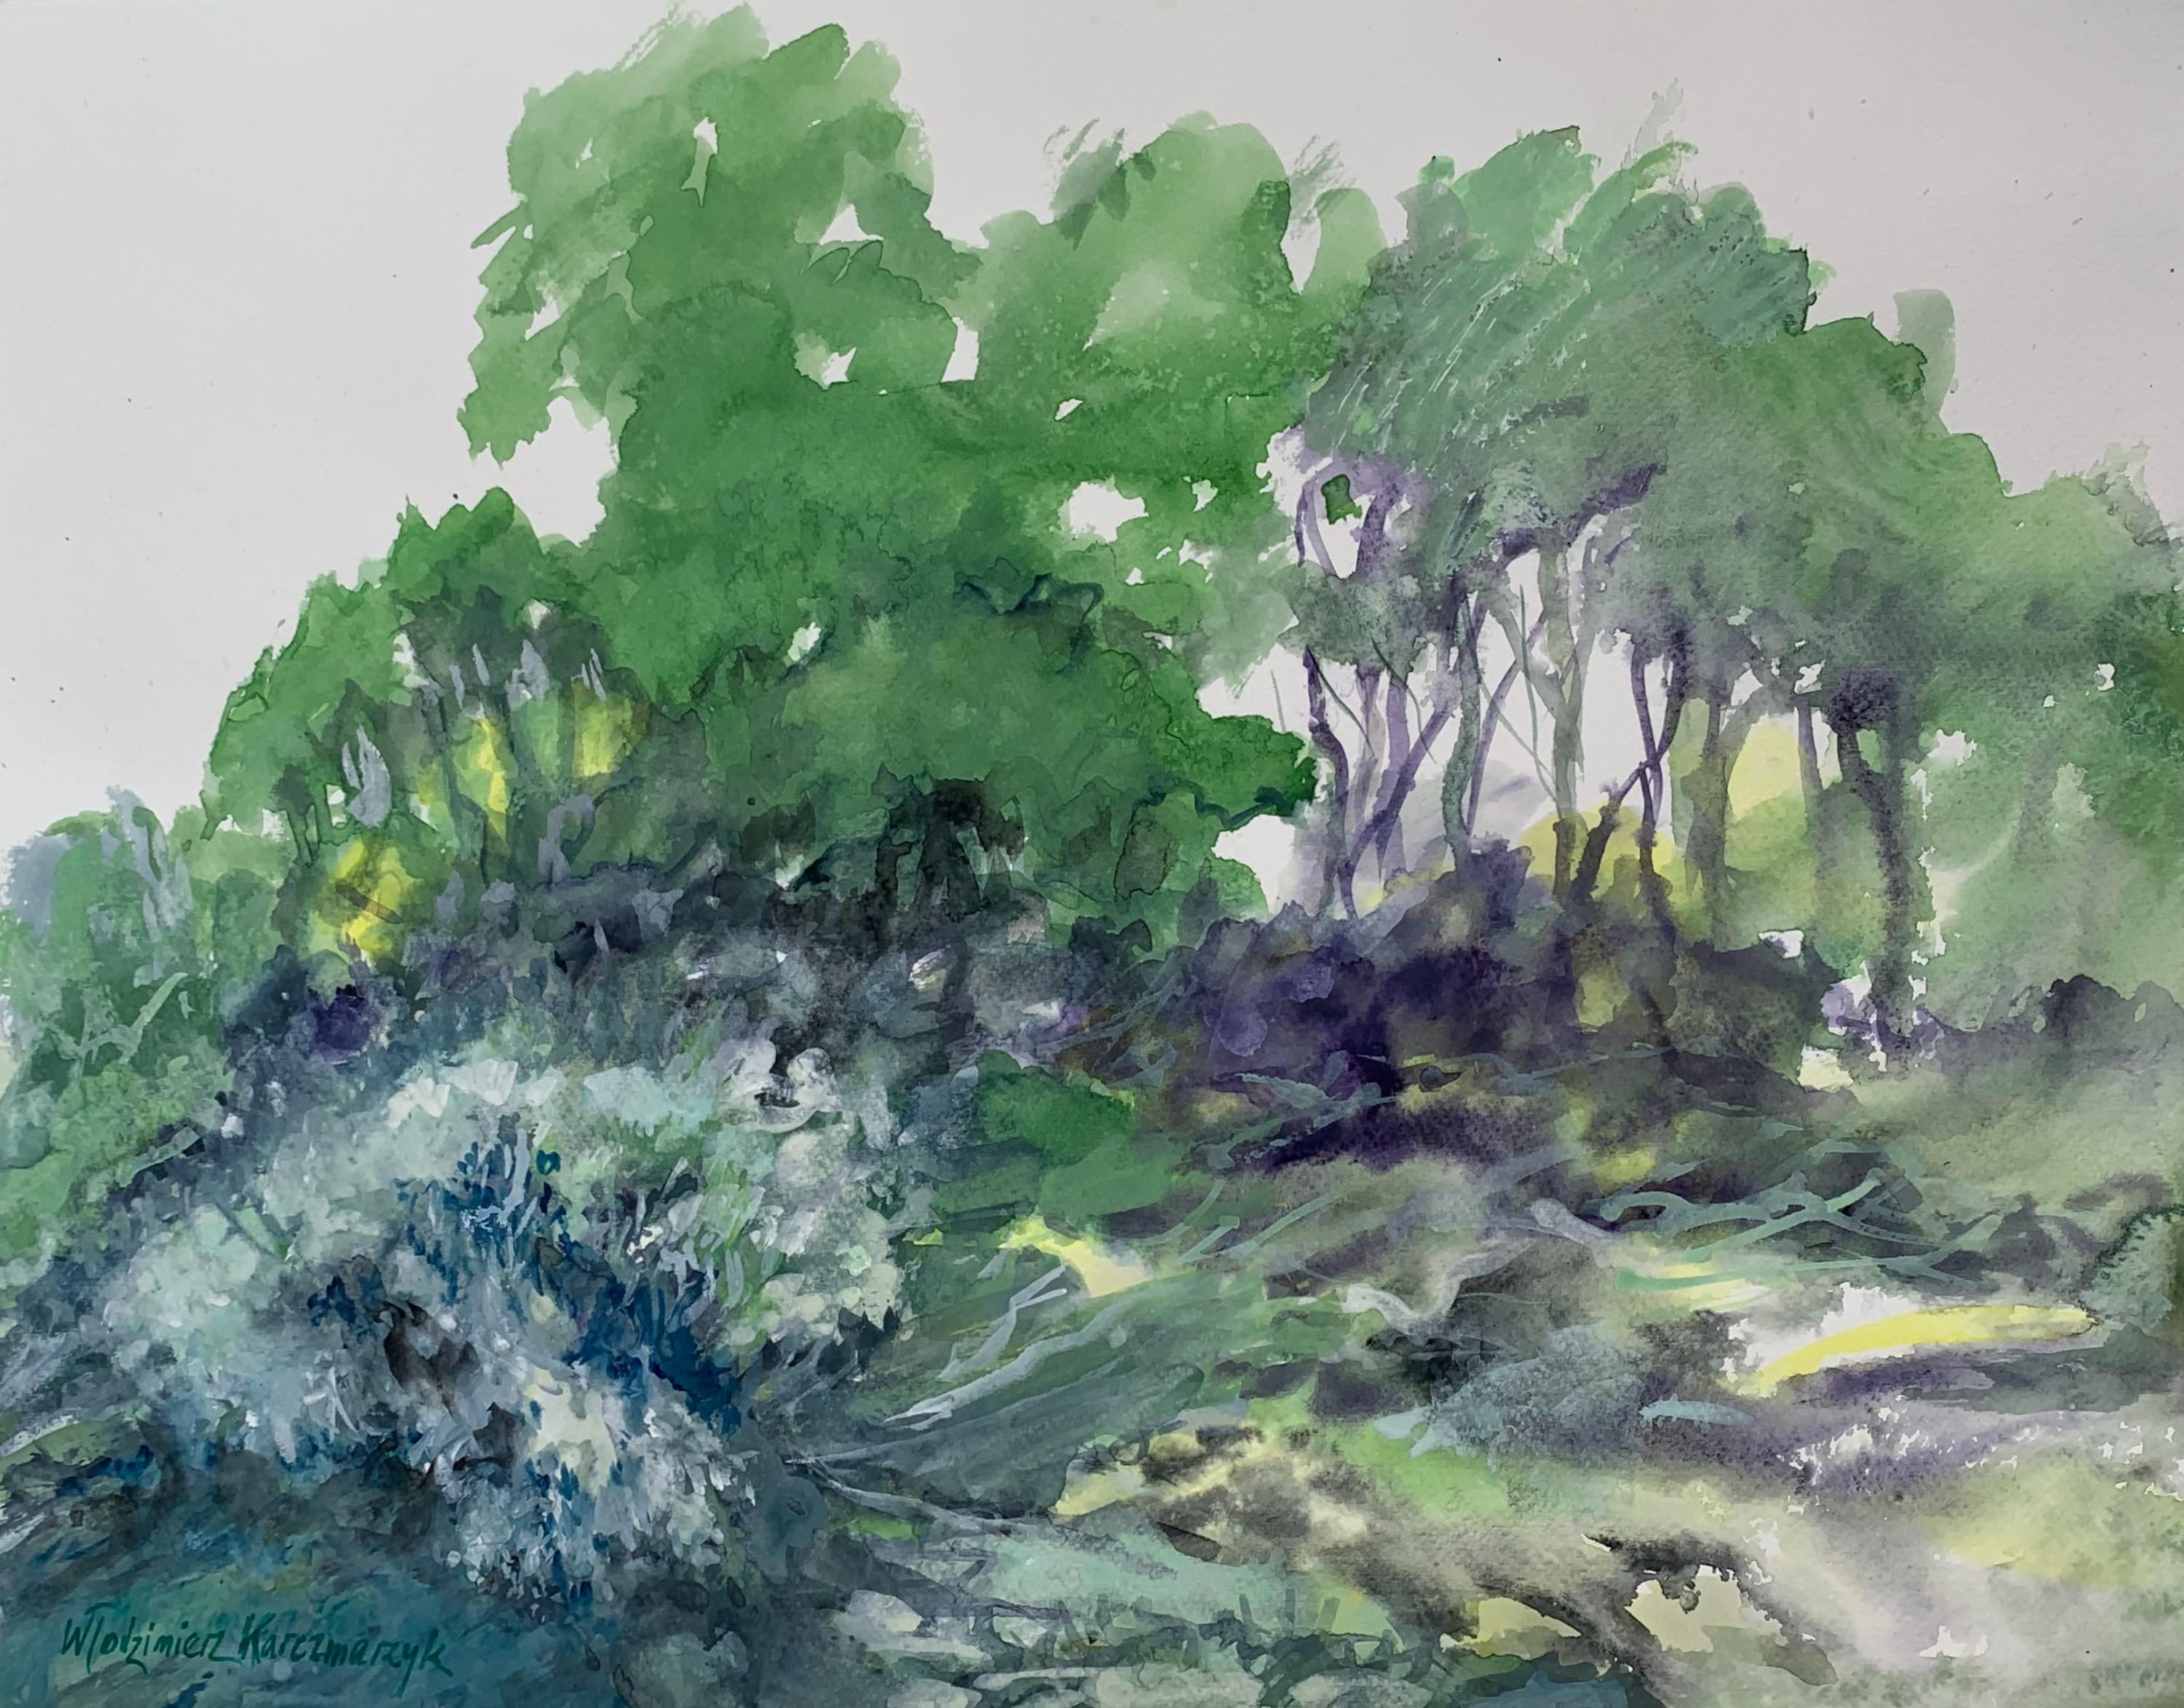 Landscape - 21 century Figurative Watercolor painting, Trees, Green